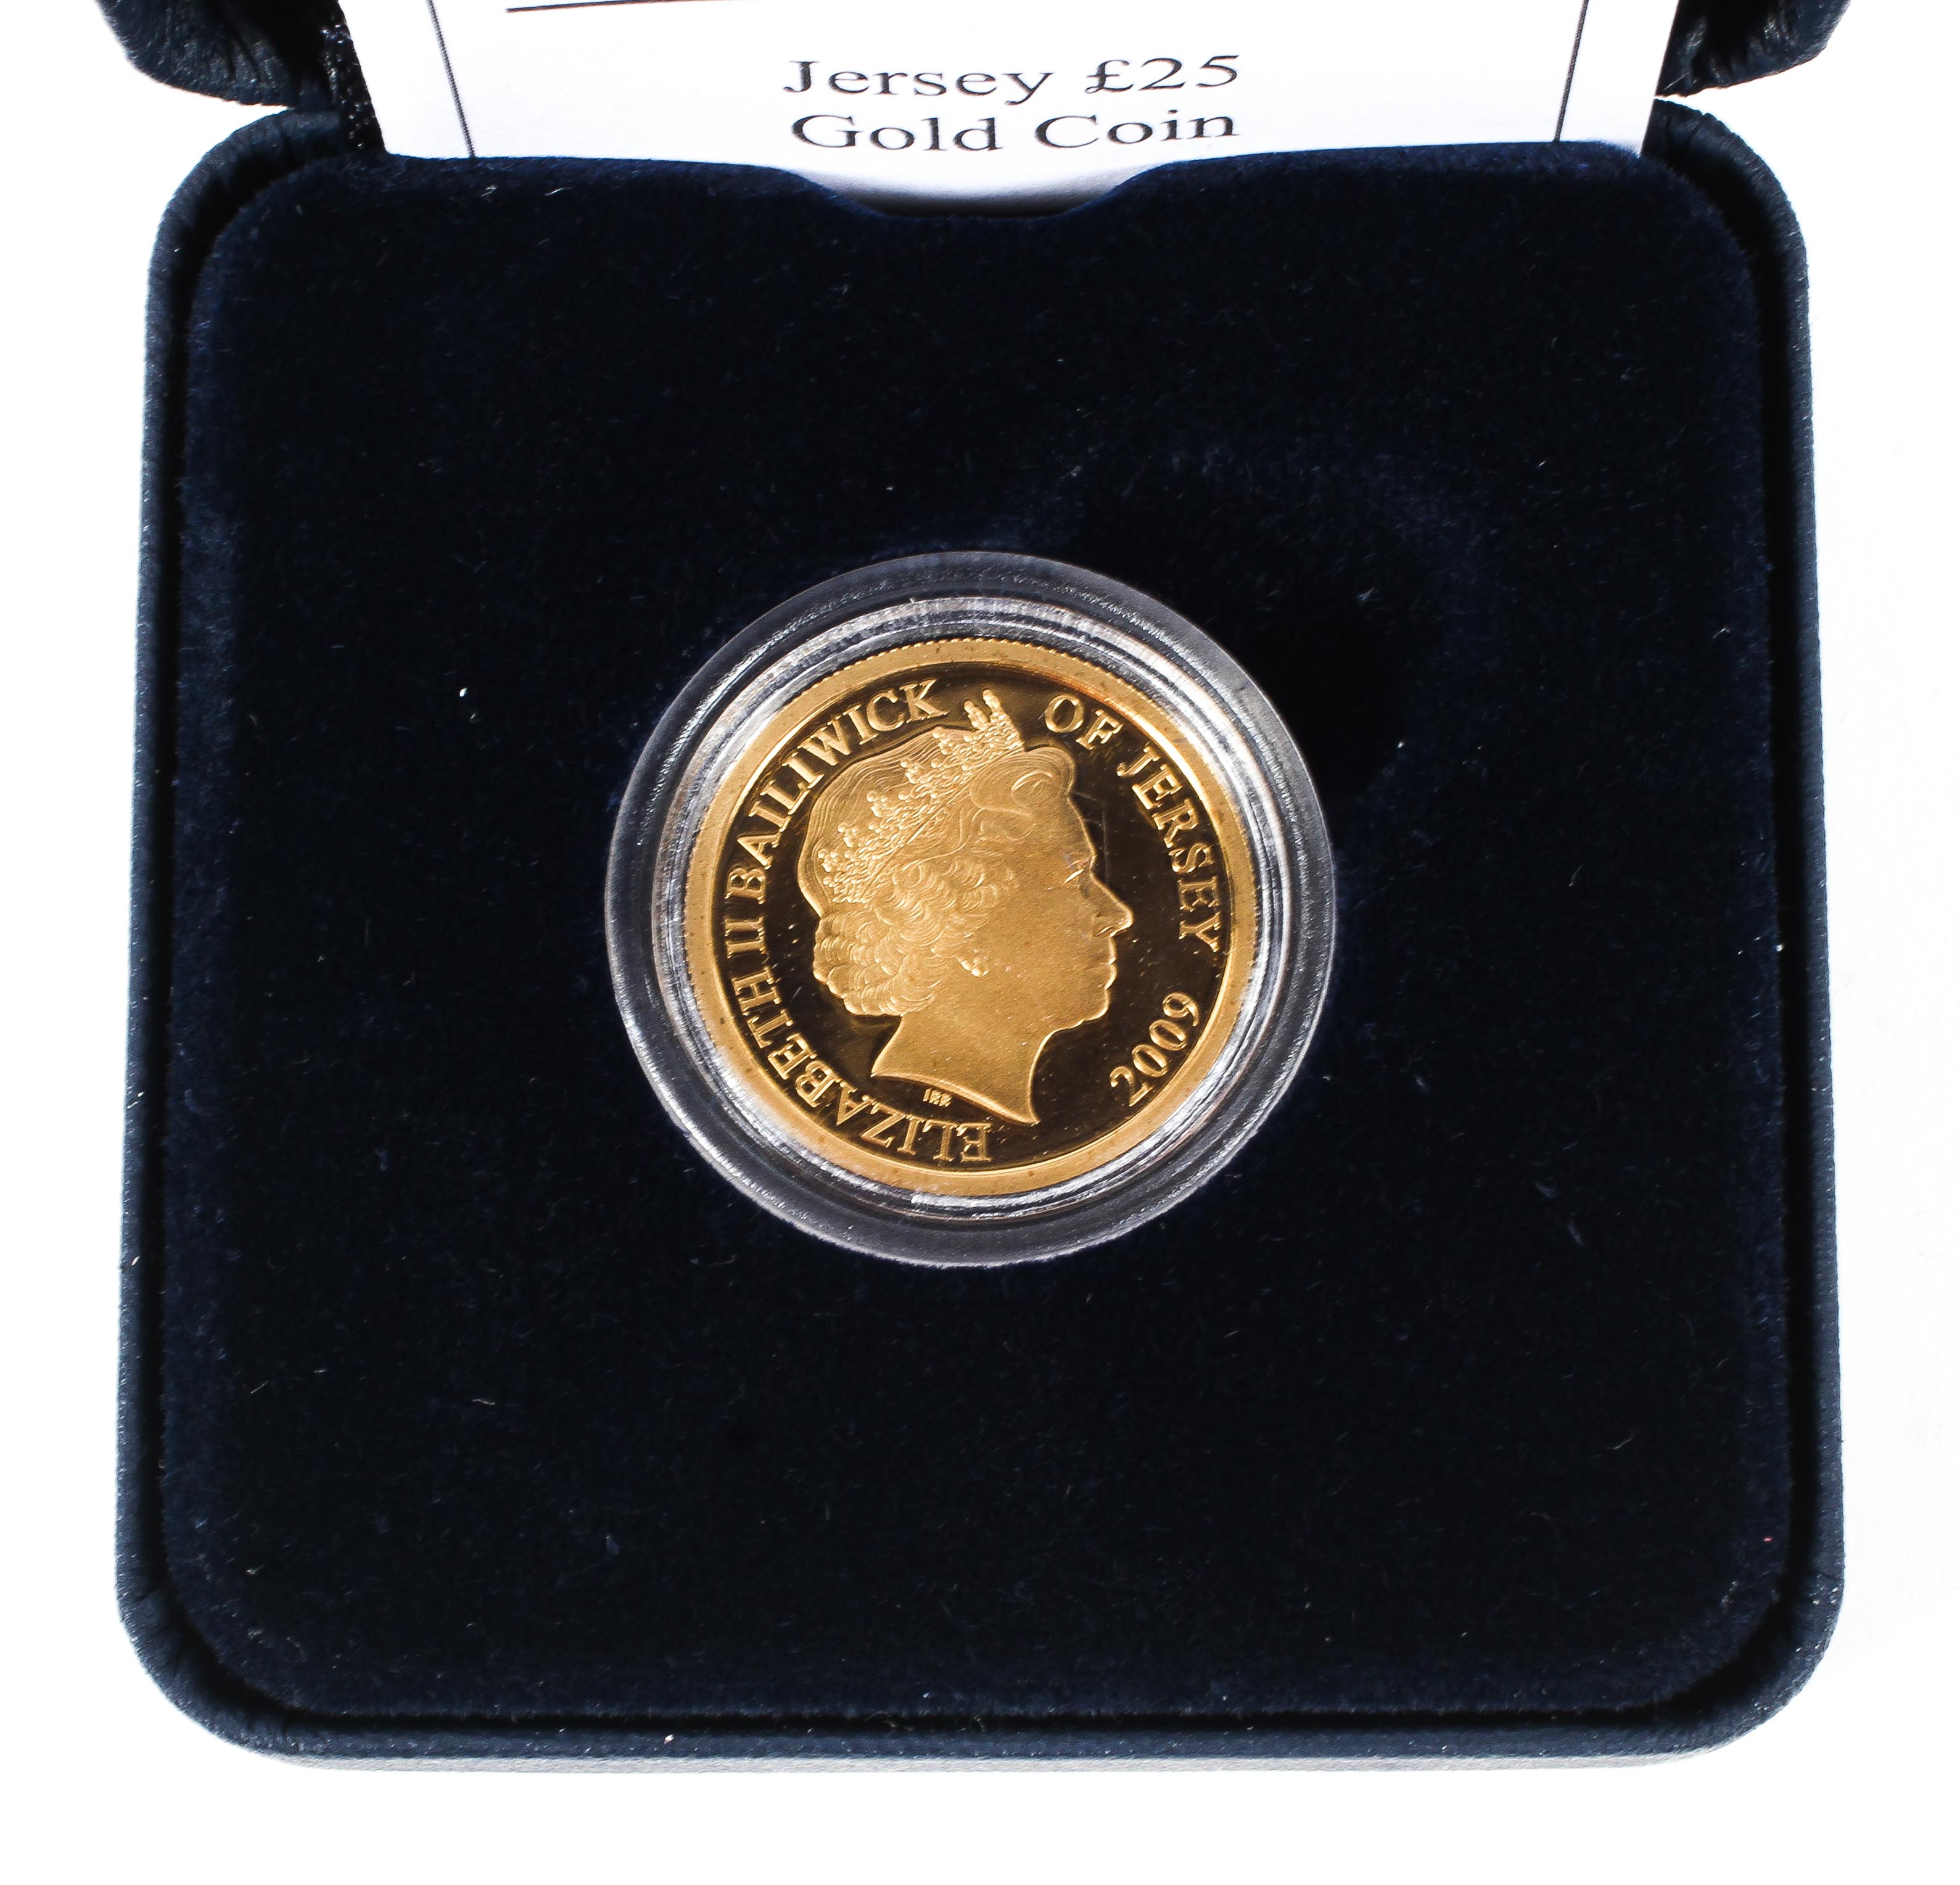 A Jersey gold £25 coin for the Battle of Agincourt, - Image 3 of 3